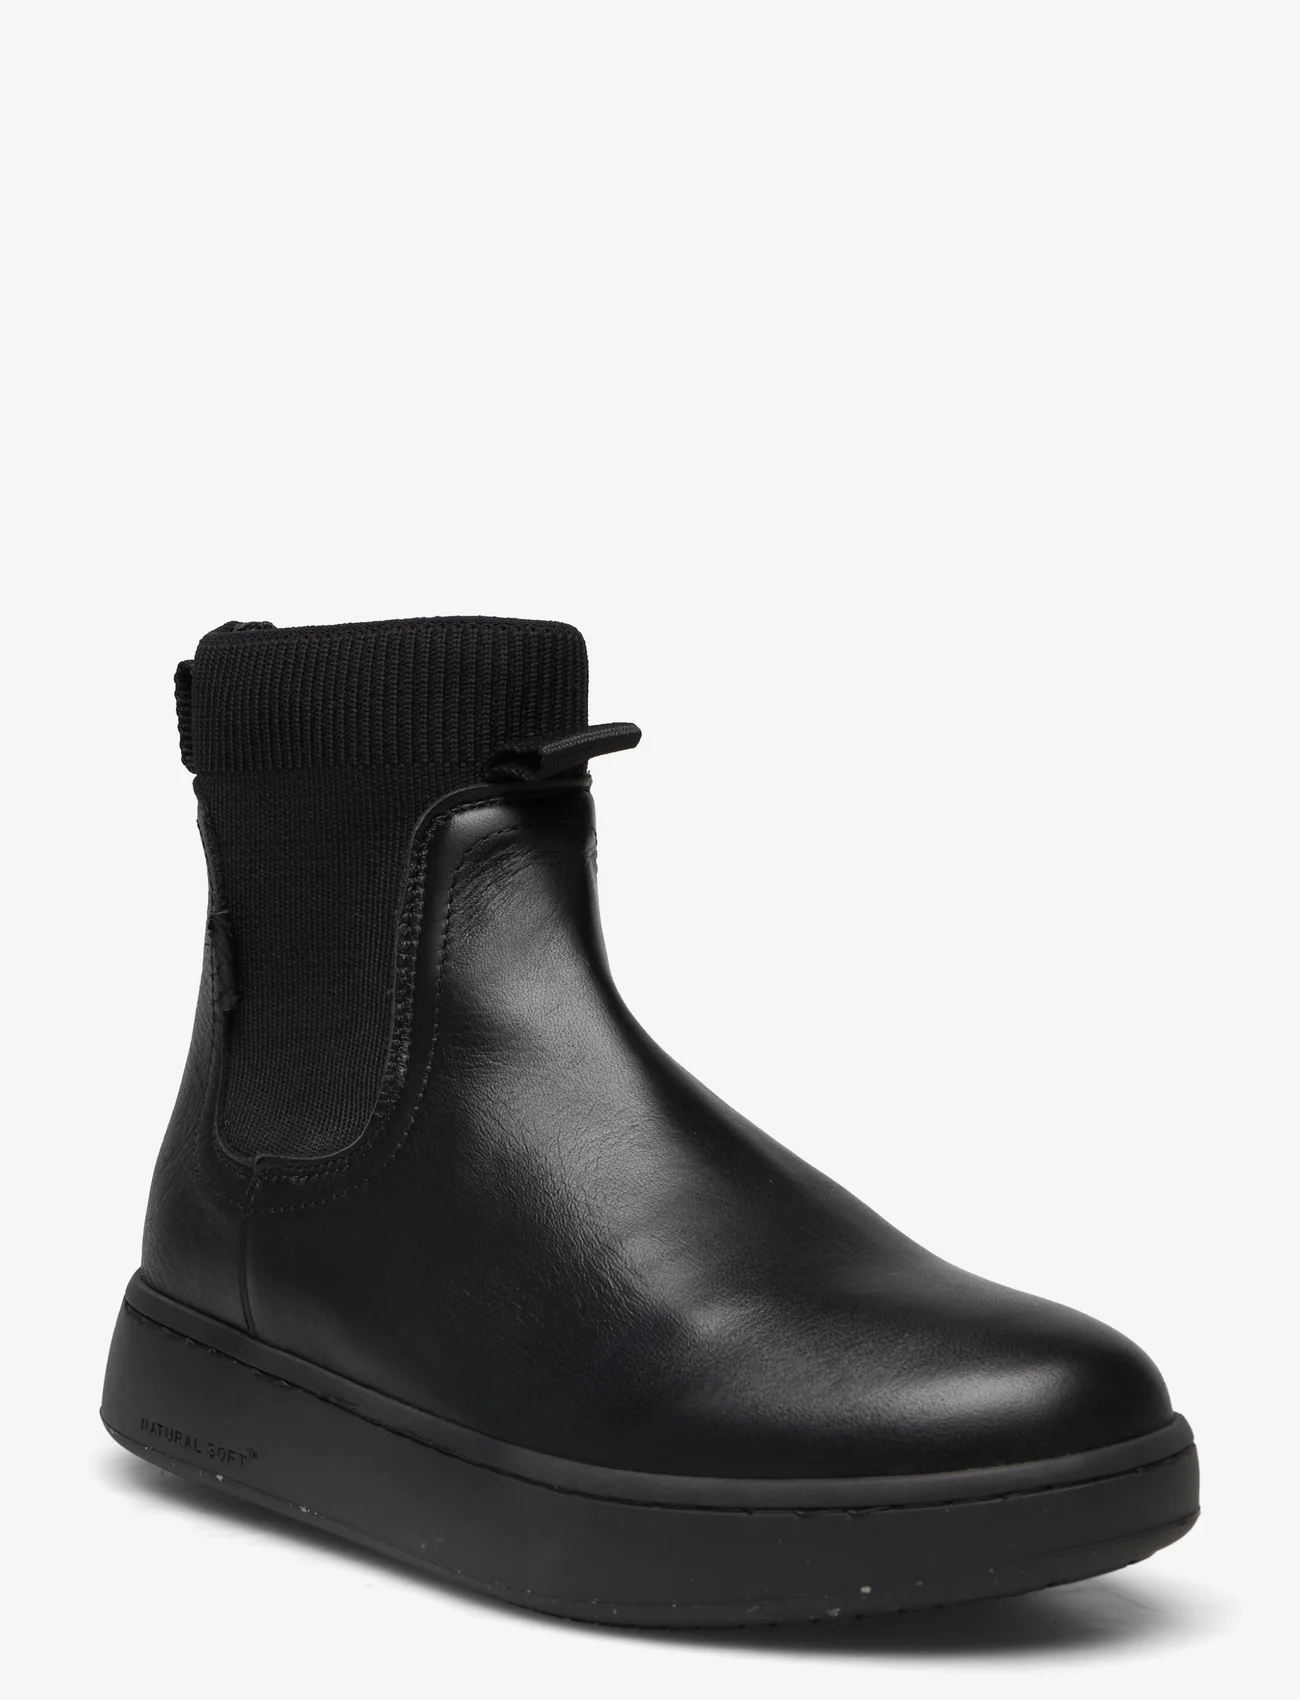 WODEN - Taylor Leather - flat ankle boots - 020 black - 0